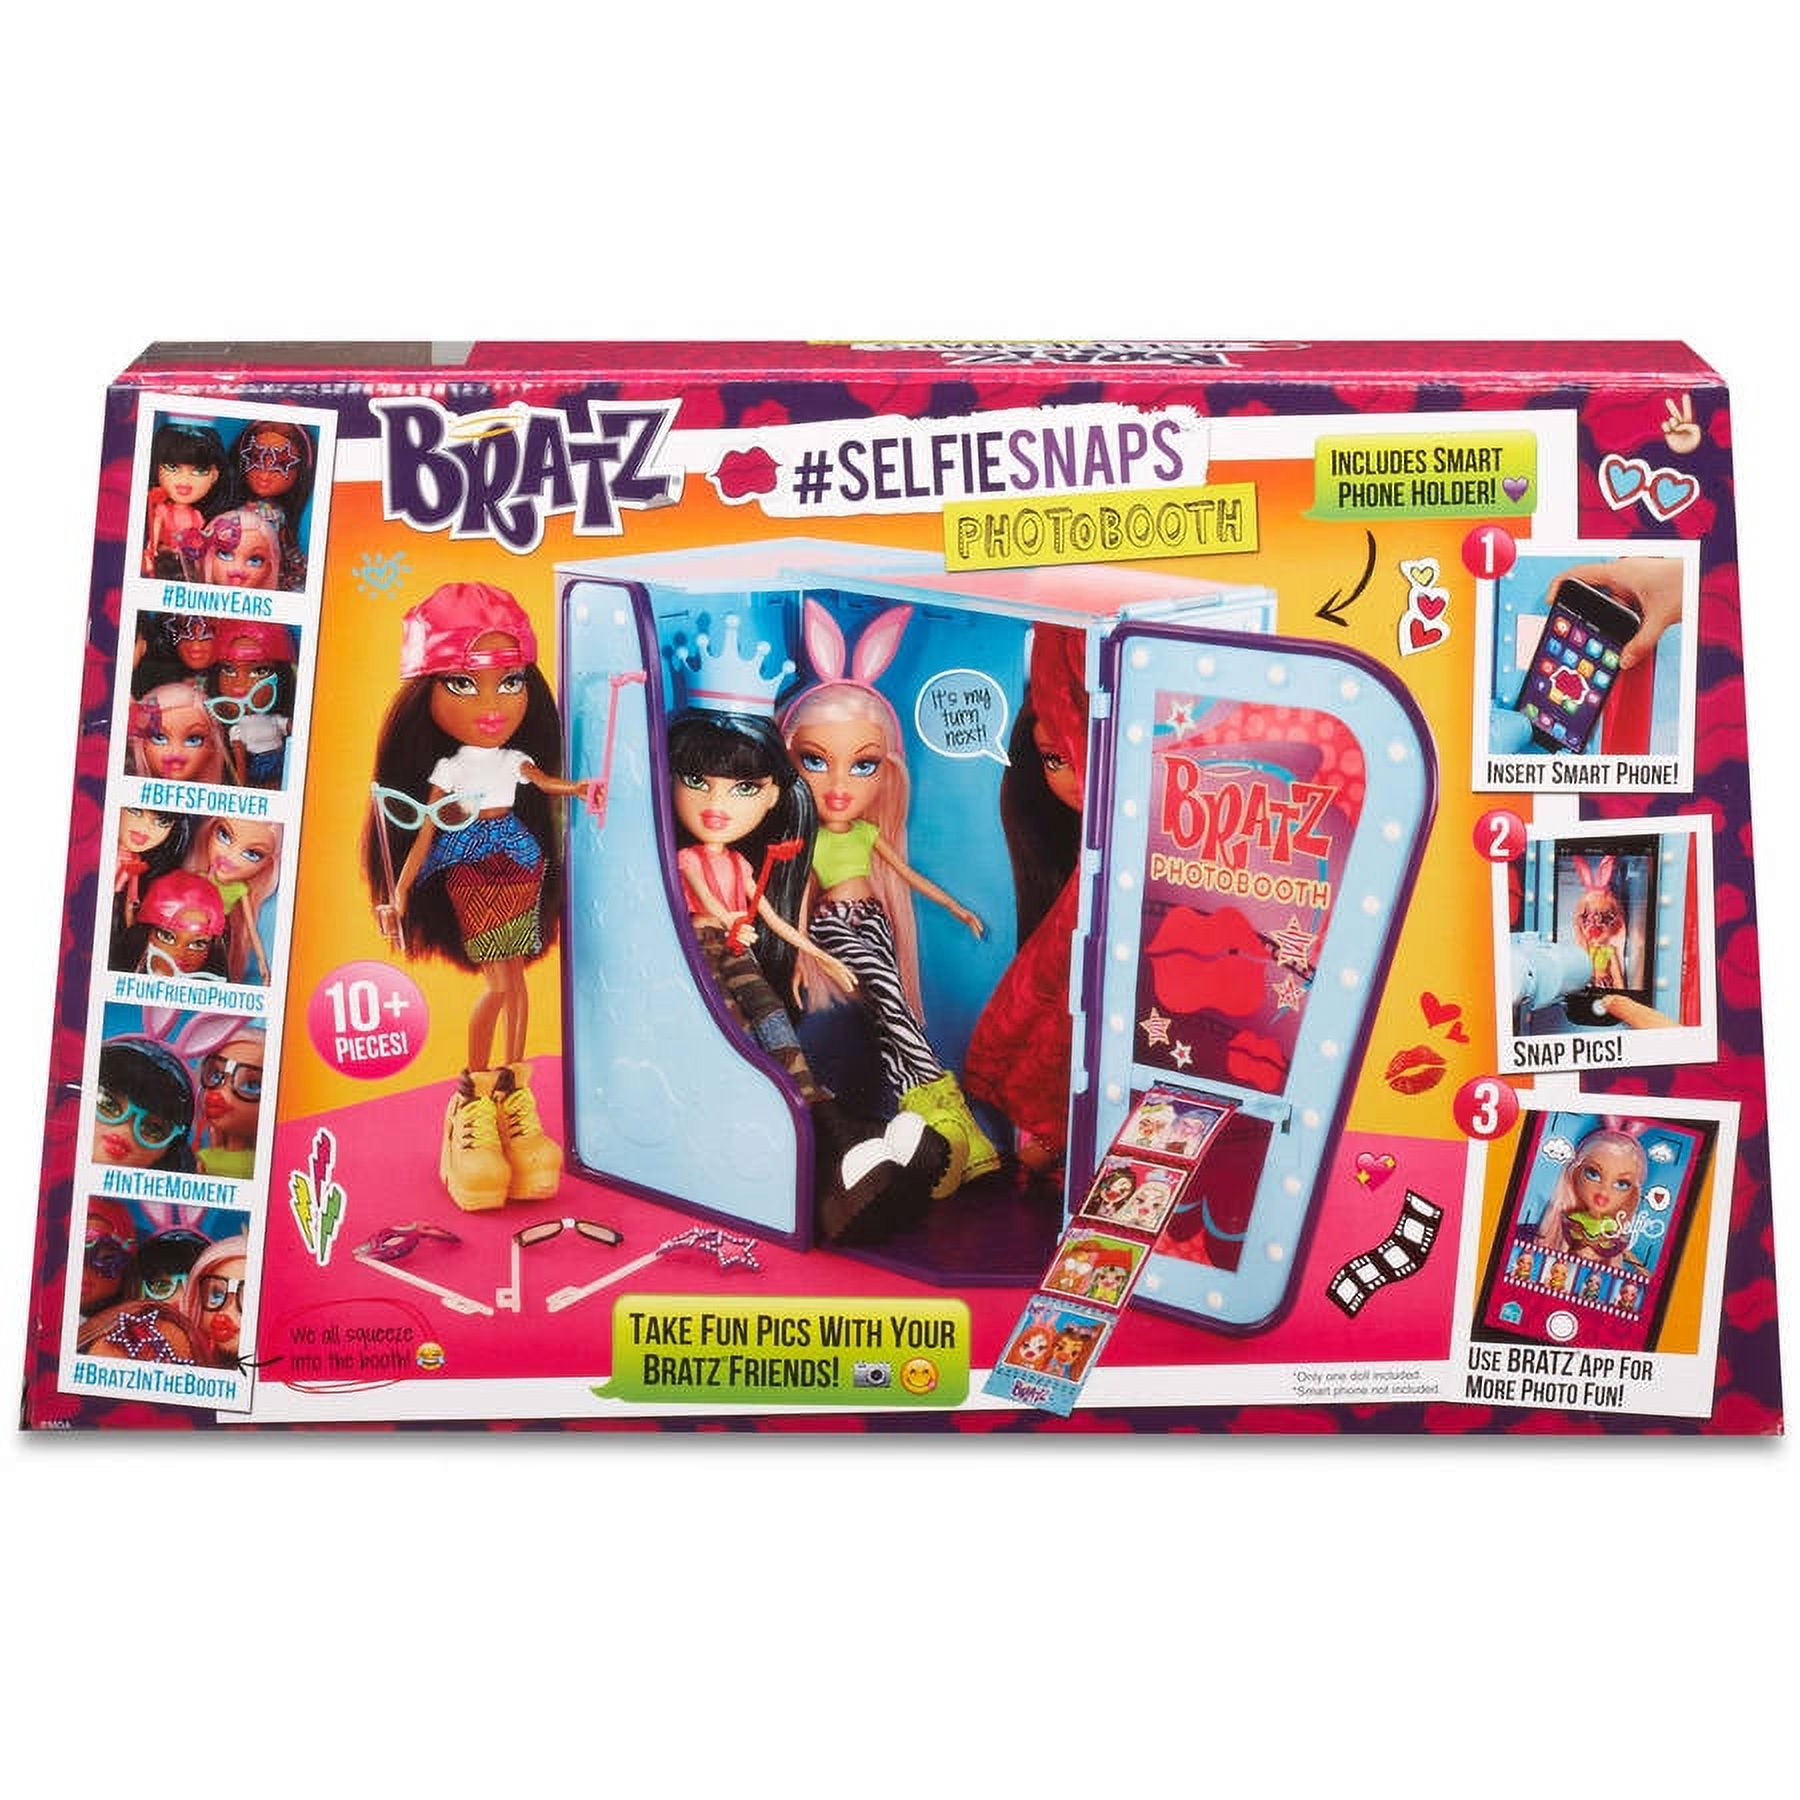 Bratz #SelfieSnaps Photobooth with Doll, Great Gift for Children Ages 6, 7, 8+ - image 5 of 5